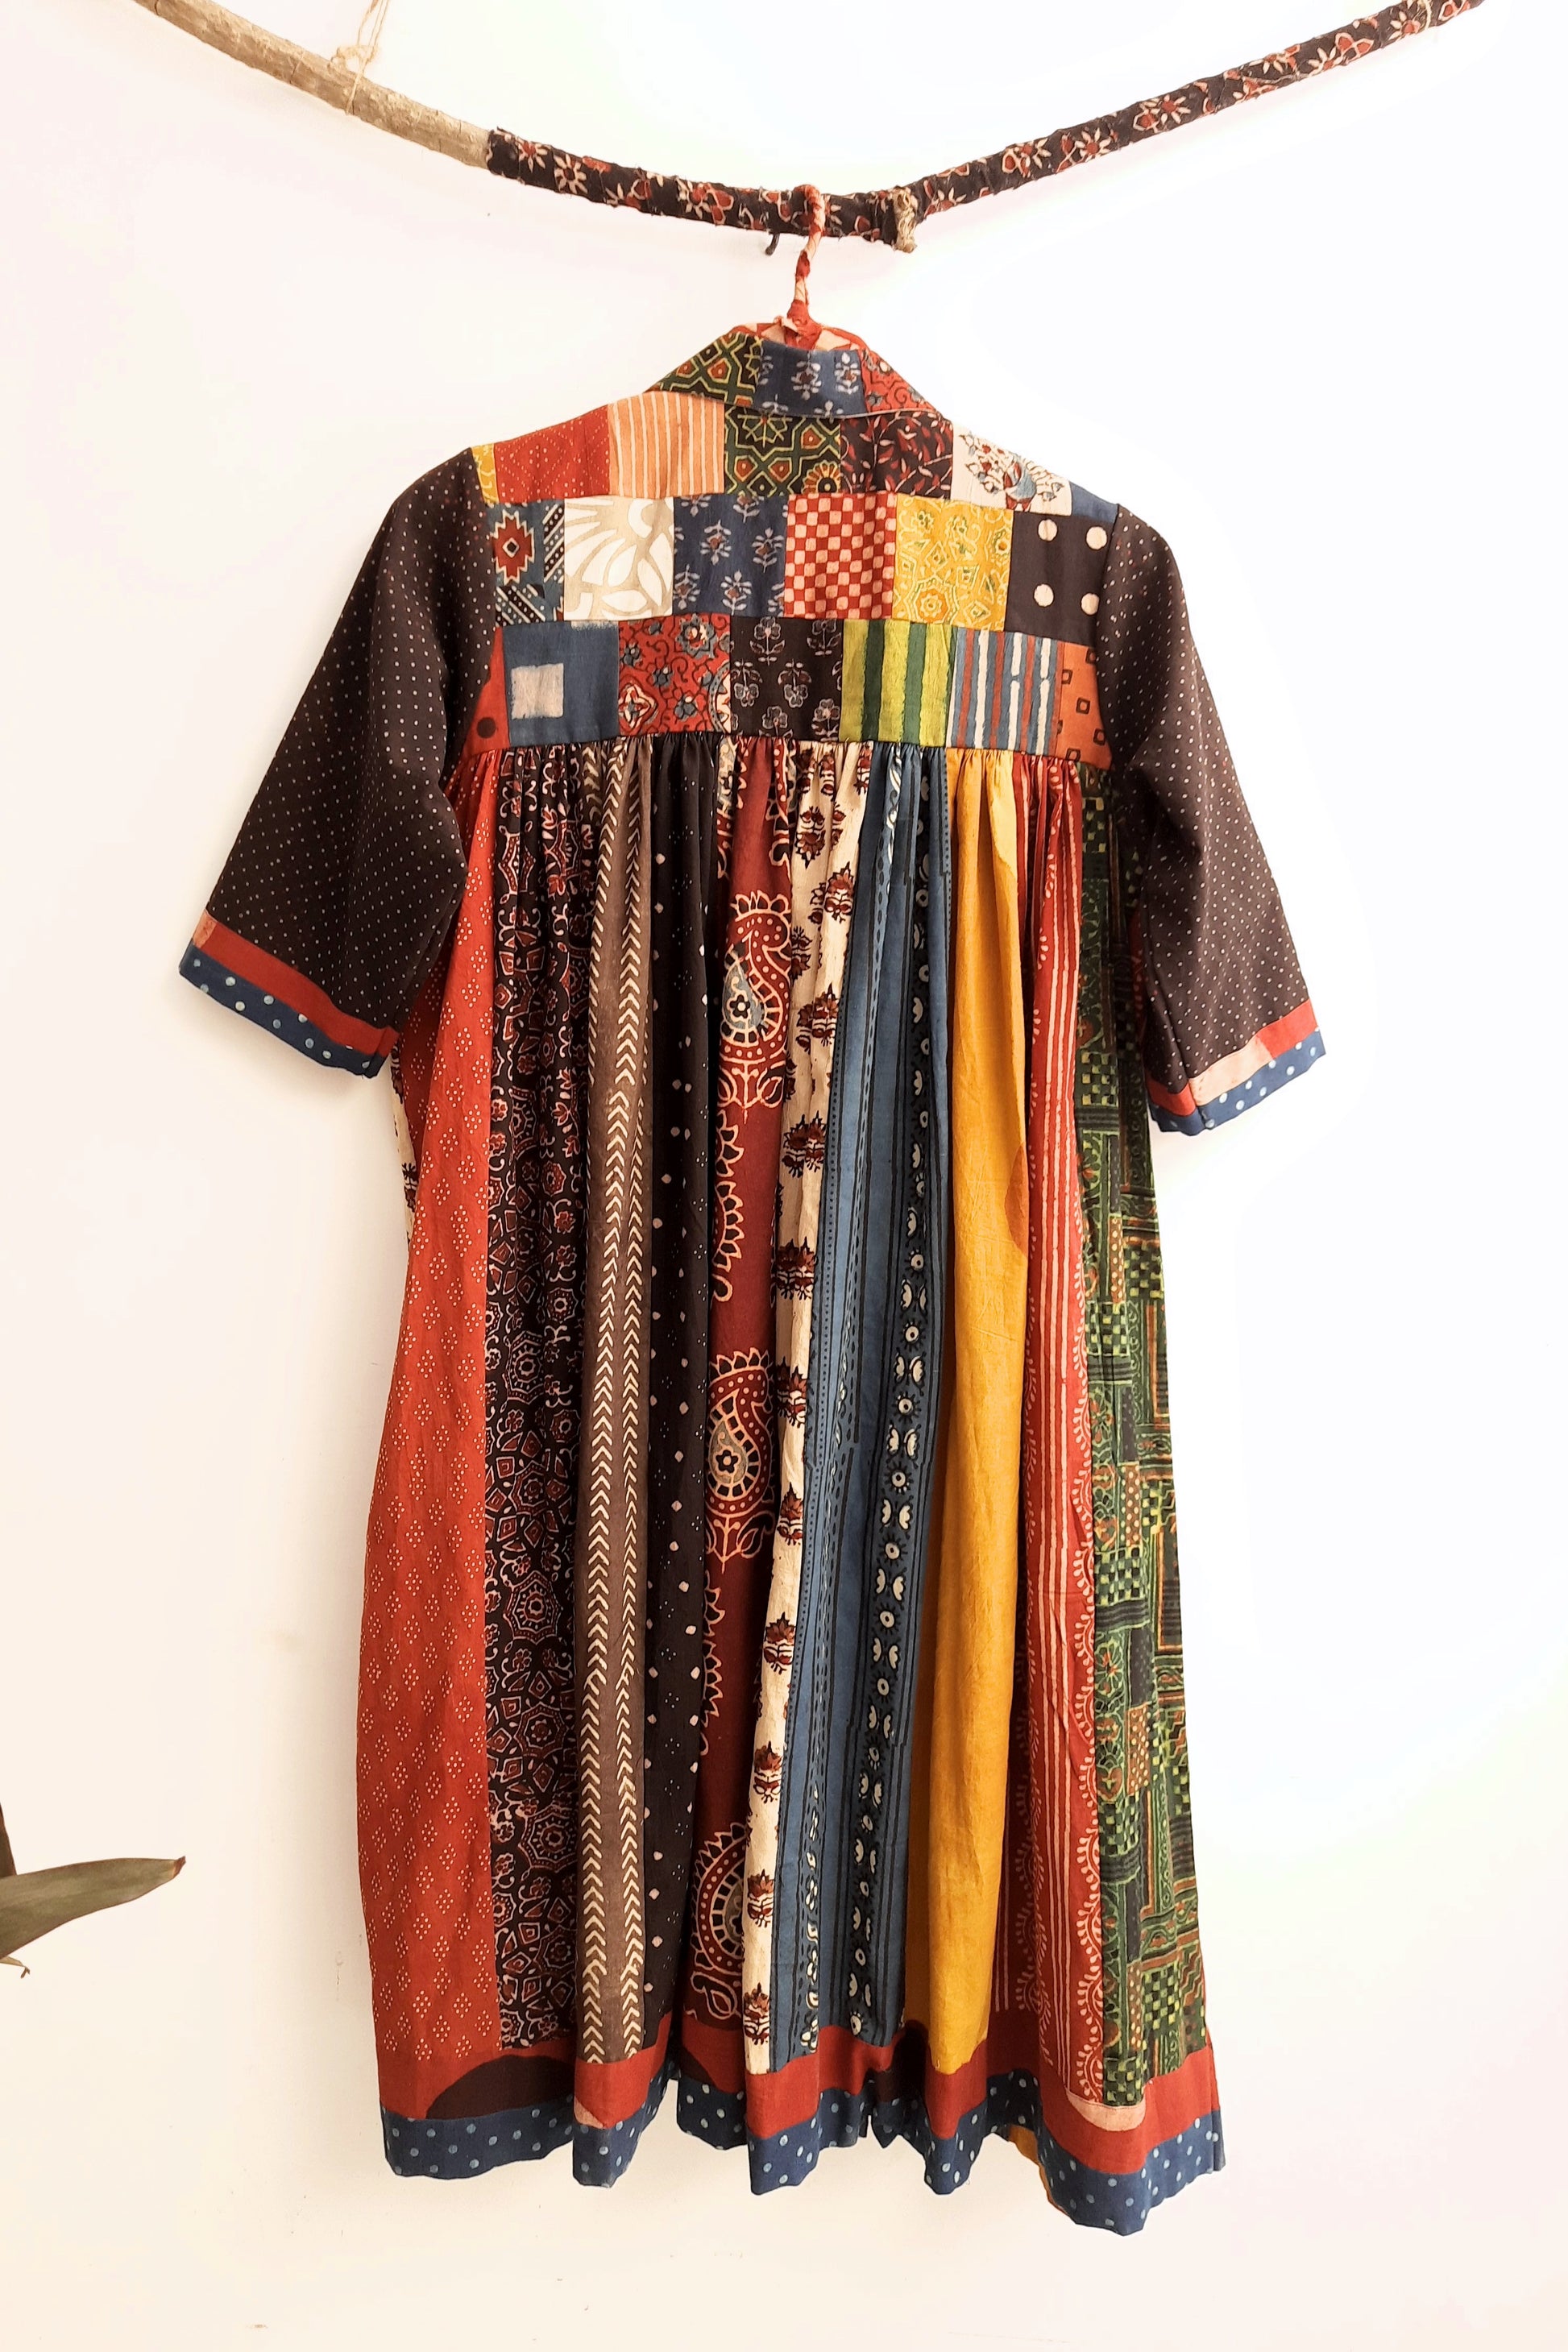 Patchwork multi ajrakh prints dress in pure cotton, Handmade natural dyed patchwork dress